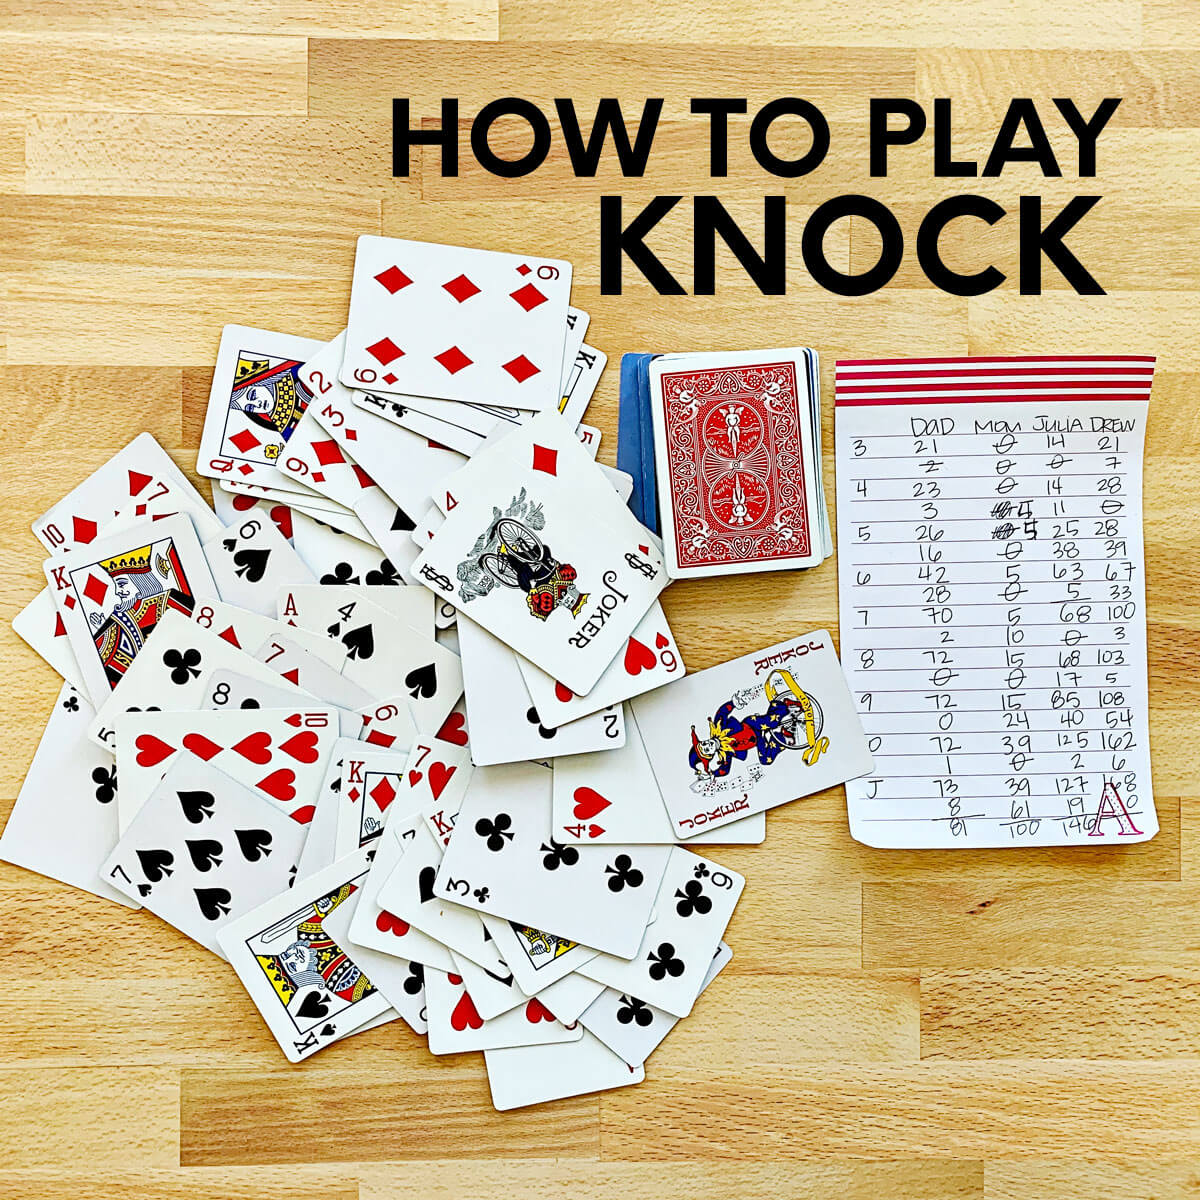 How to Play Knock-Fun card game